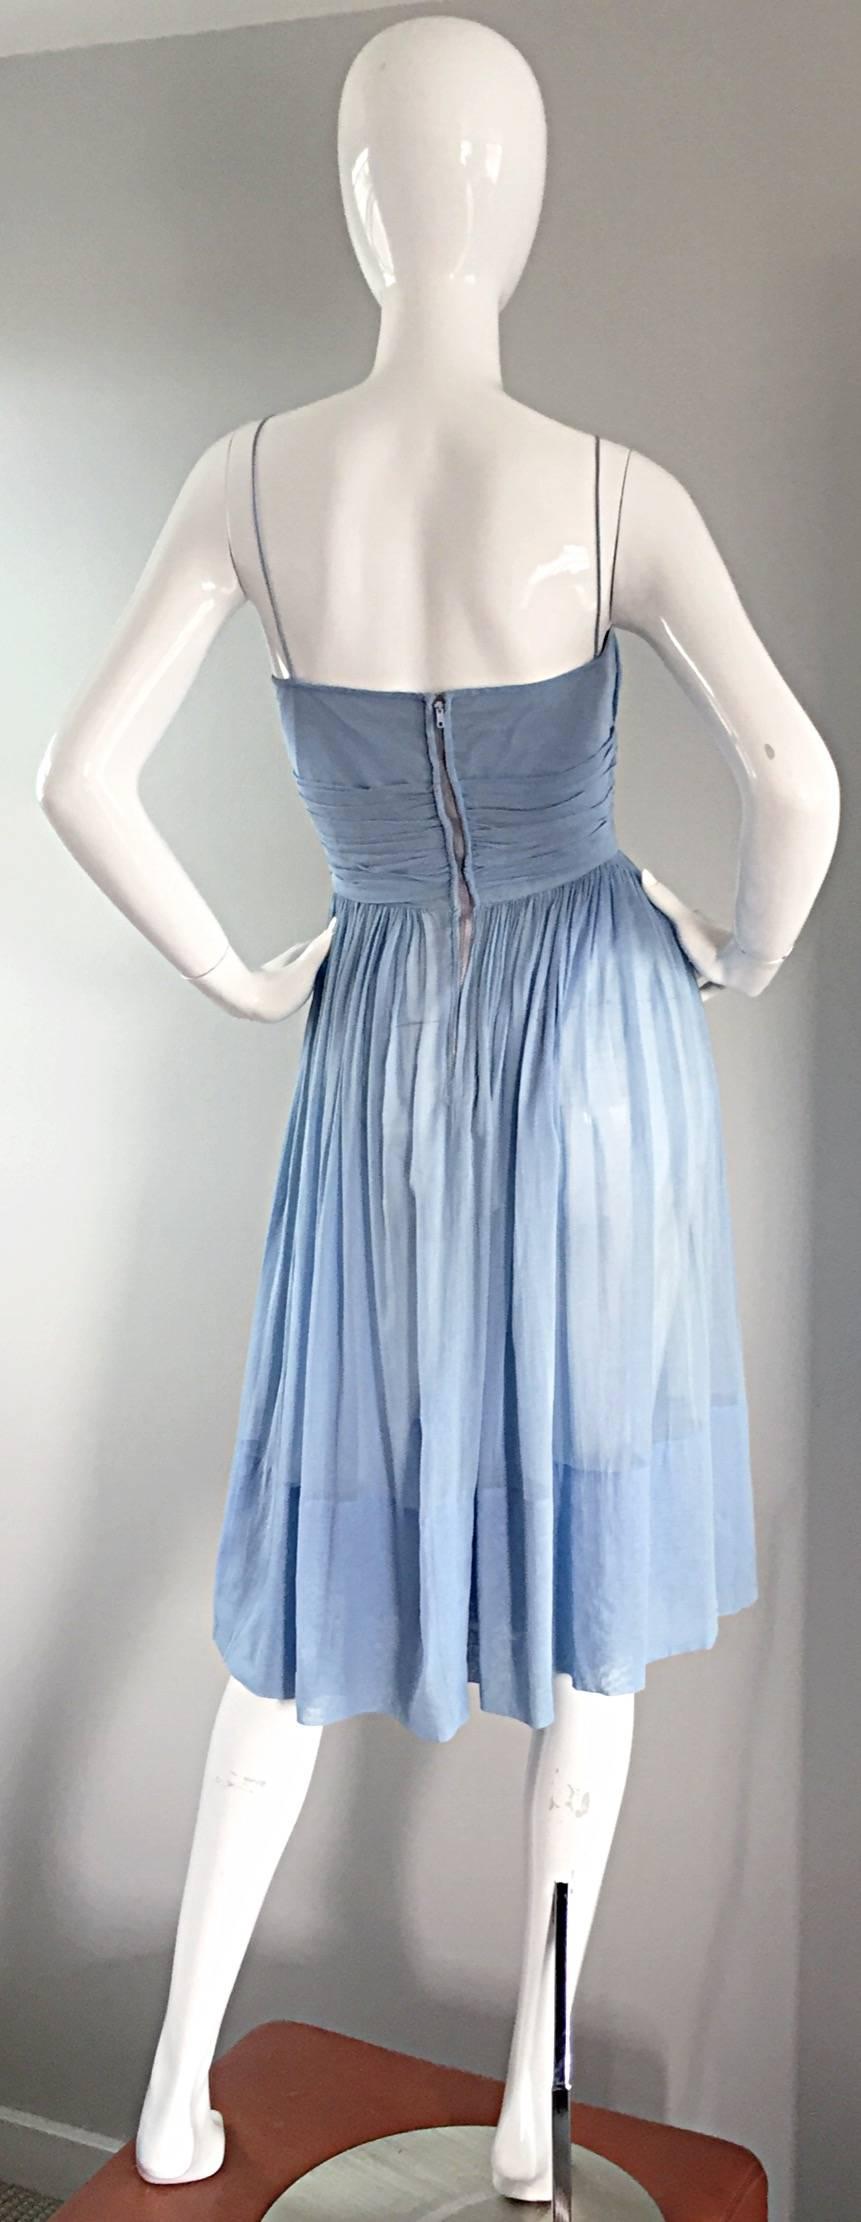 Such a chic and stylish vintage 1950s pale blue, lightweight cotton dress! Features flattering pleating detail at bust, bodice, and skirt. Attached blue and ivory cameo at waist. Extremely well made! Thin spaghetti straps, with an amazing bust cut!